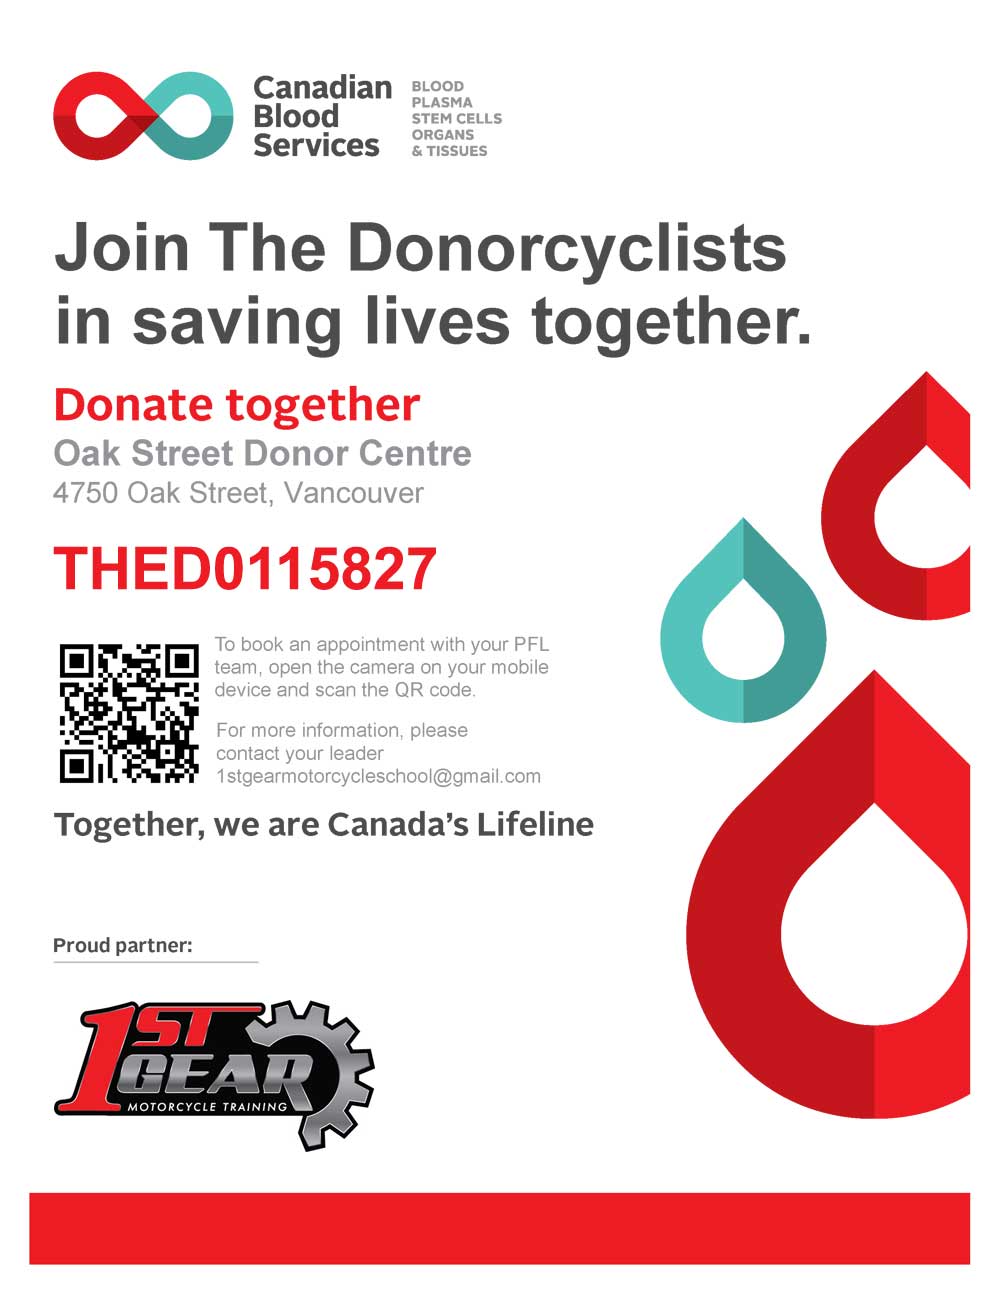 1st Gear Motorcycle Training & Canadian Blood Services. Donorcyclists.